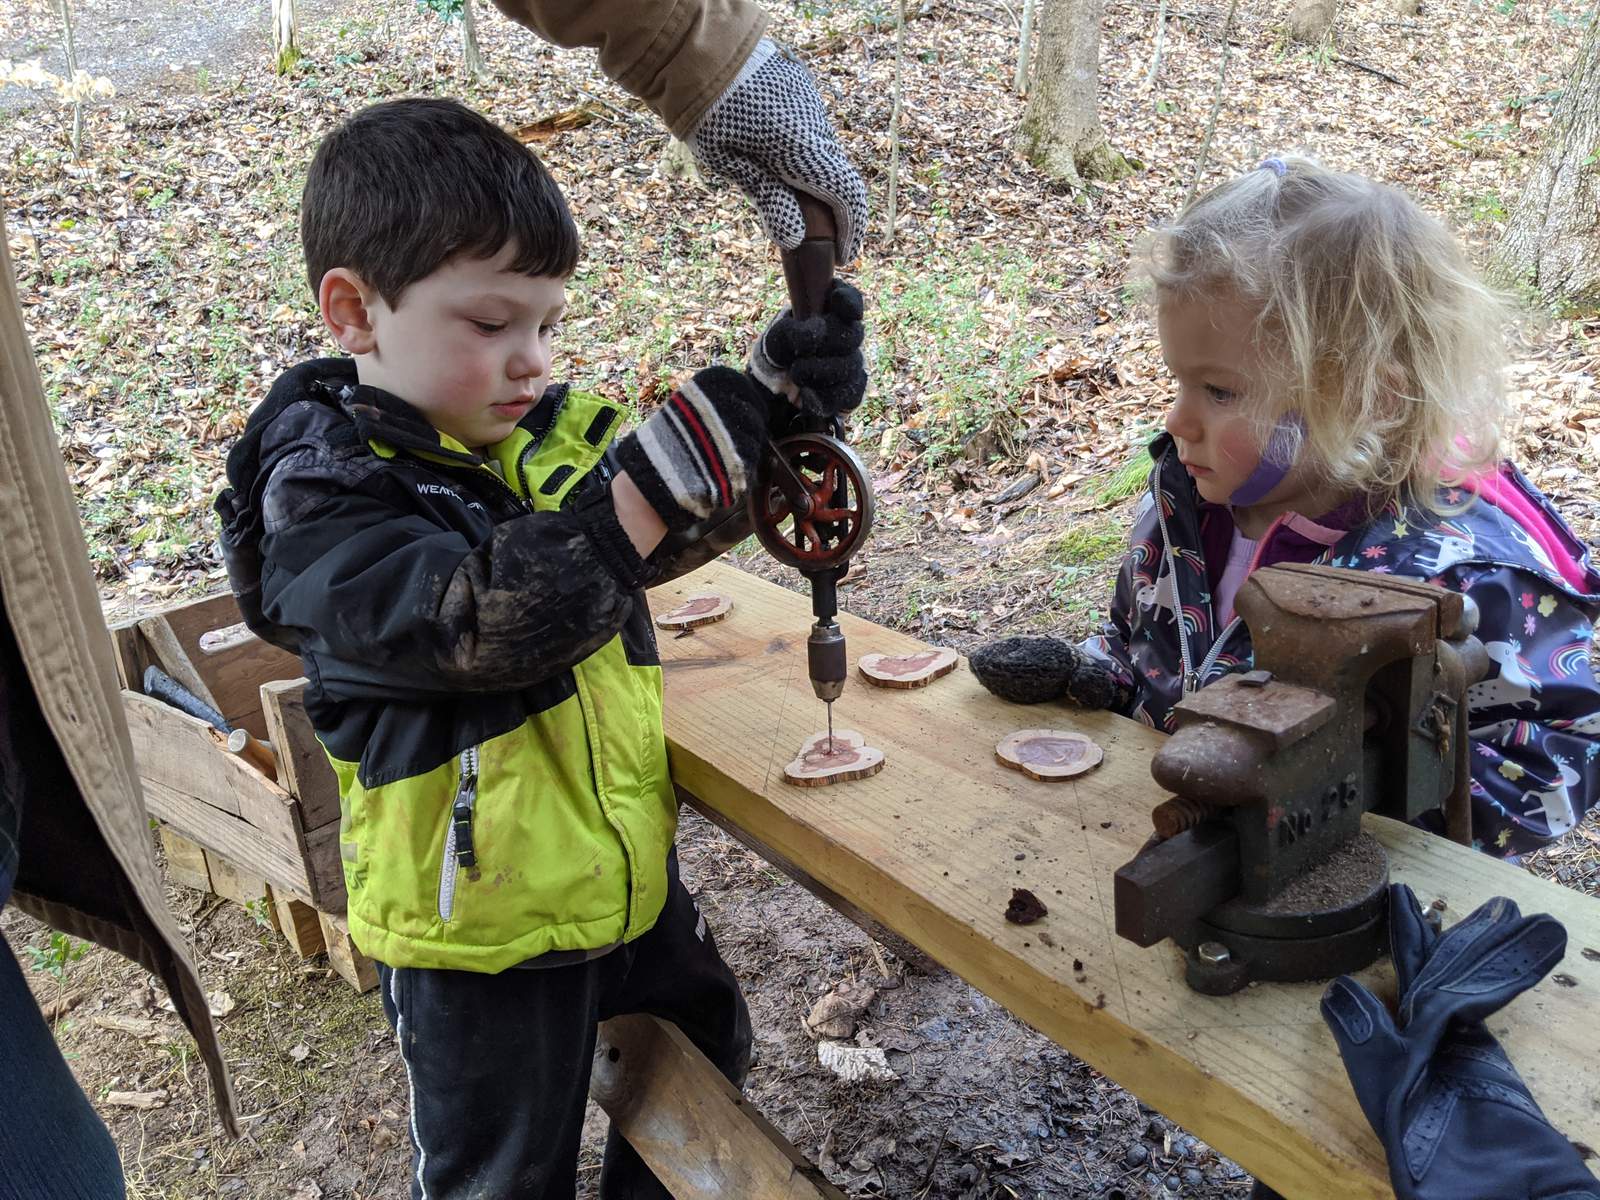 Unique Schools: Forest School means kids spend the entire class day outside